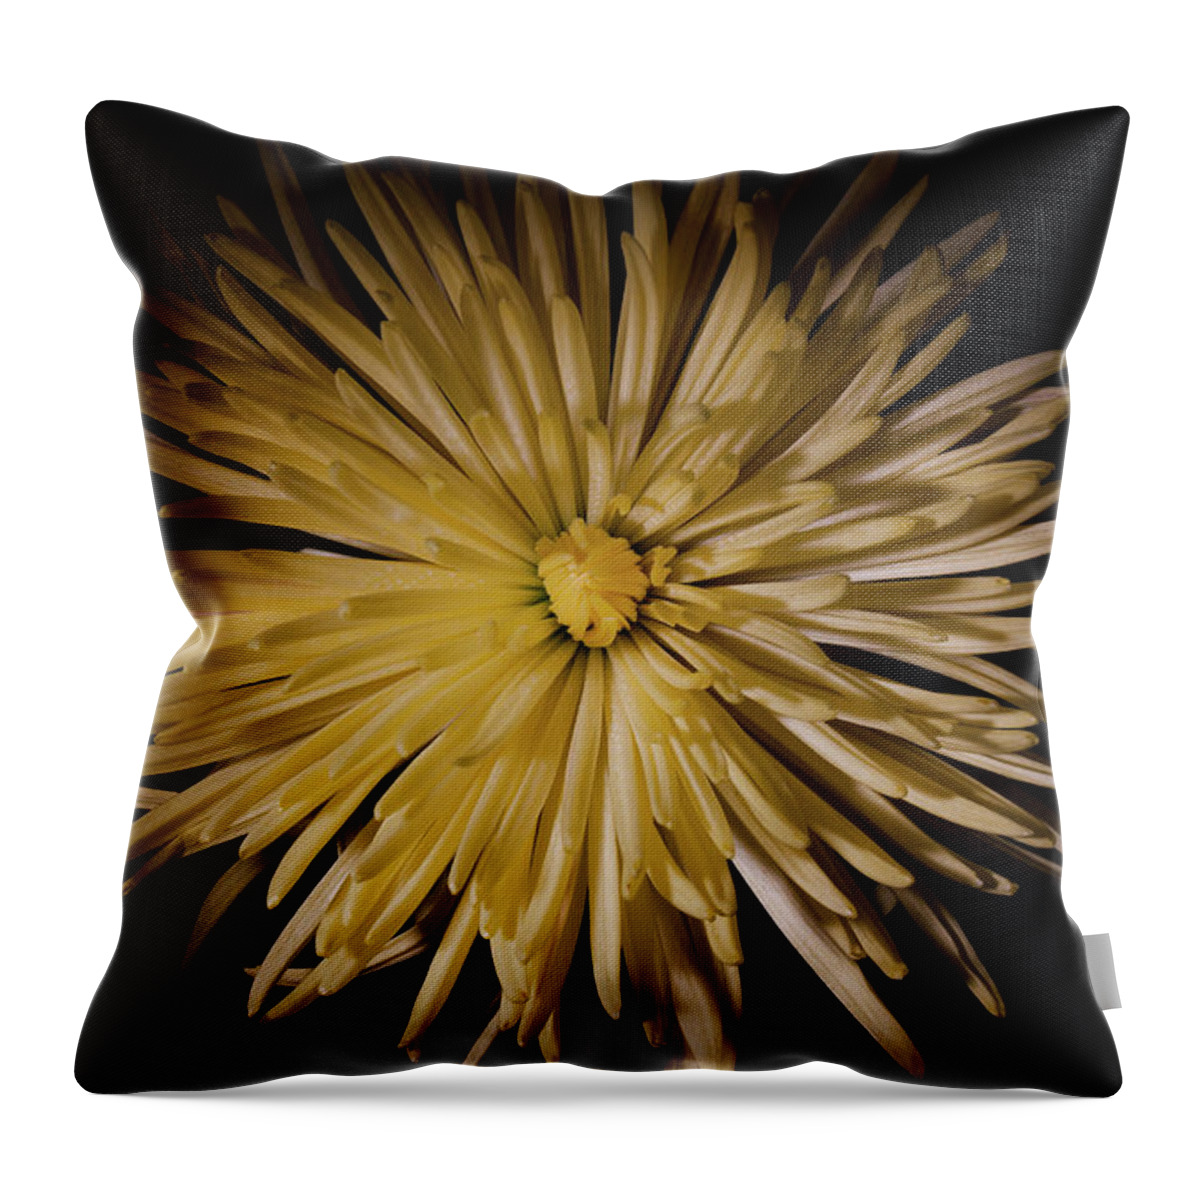 Chrysanthemum Throw Pillow featuring the photograph Yellow Spider Mum by Eugene Campbell